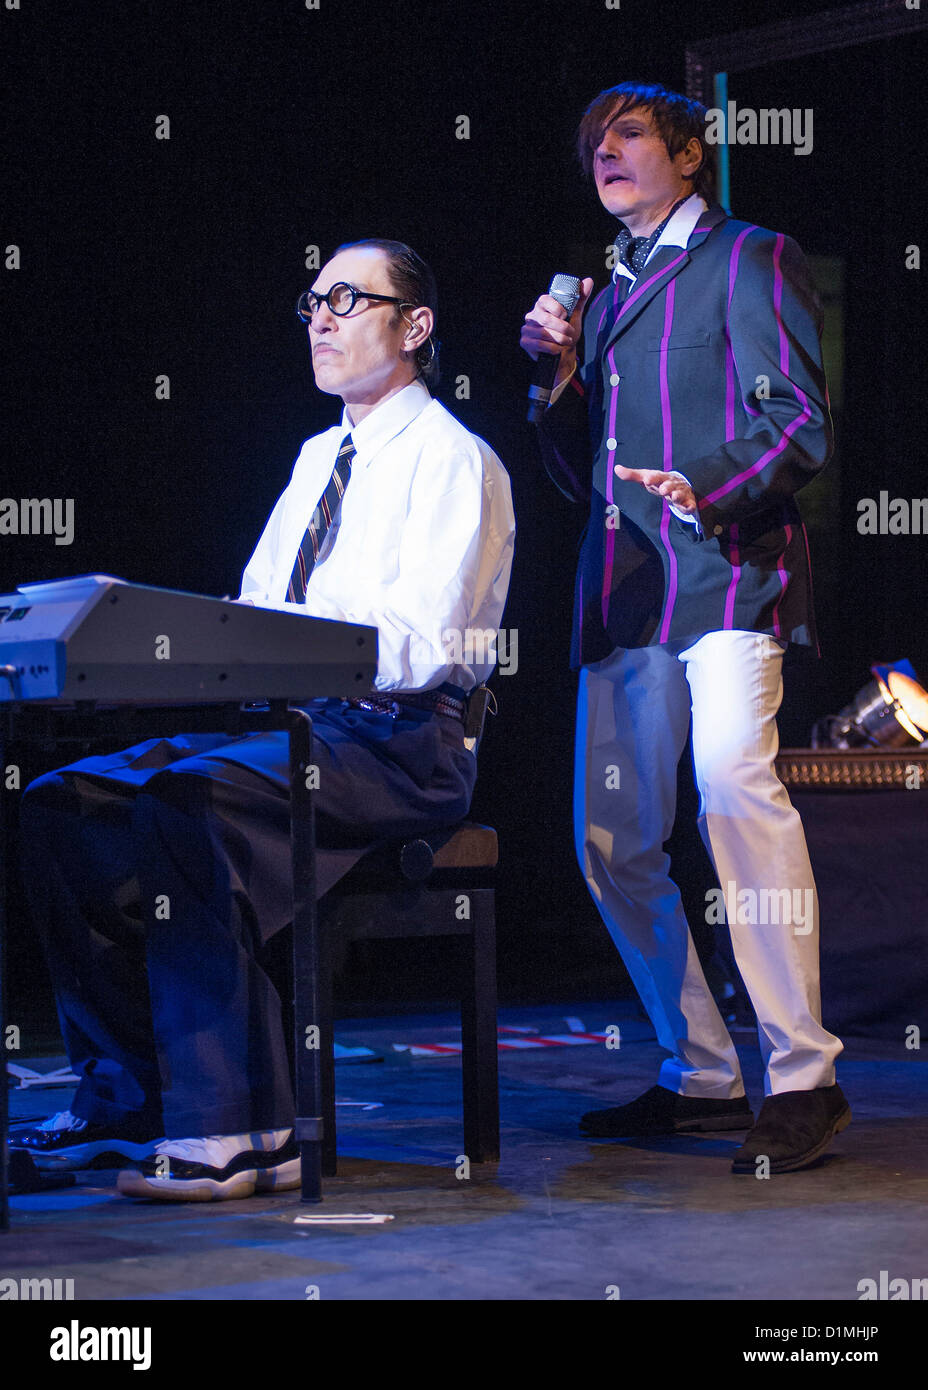 Sparks plays HMV Forum on 20/03/2009 at HMV Forum, London.  Persons pictured: Ron Mael (keyboards) and Russell Mael (vocals).. Picture by Julie Edwards Stock Photo